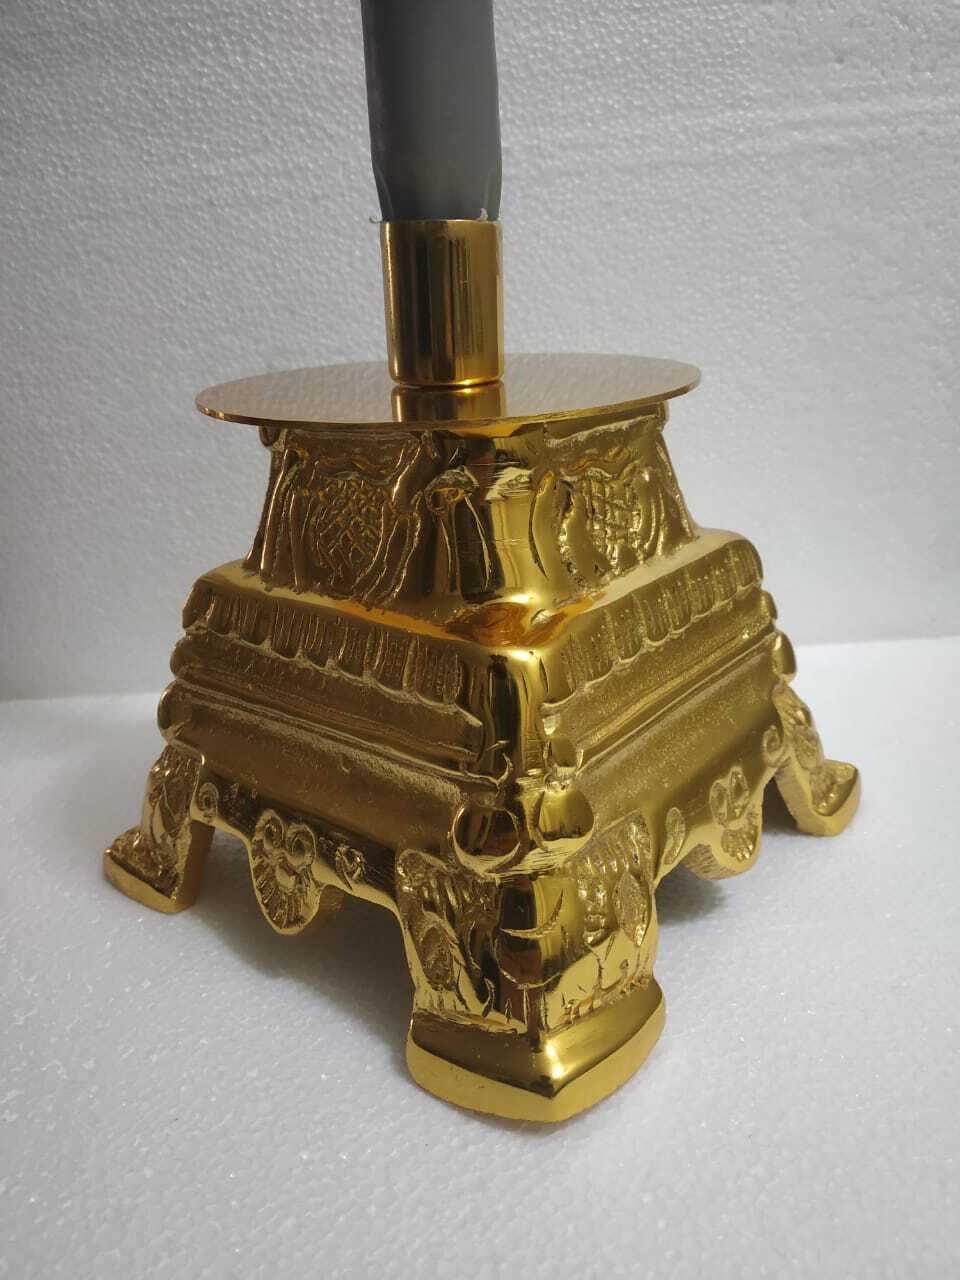 Church Candle Holder